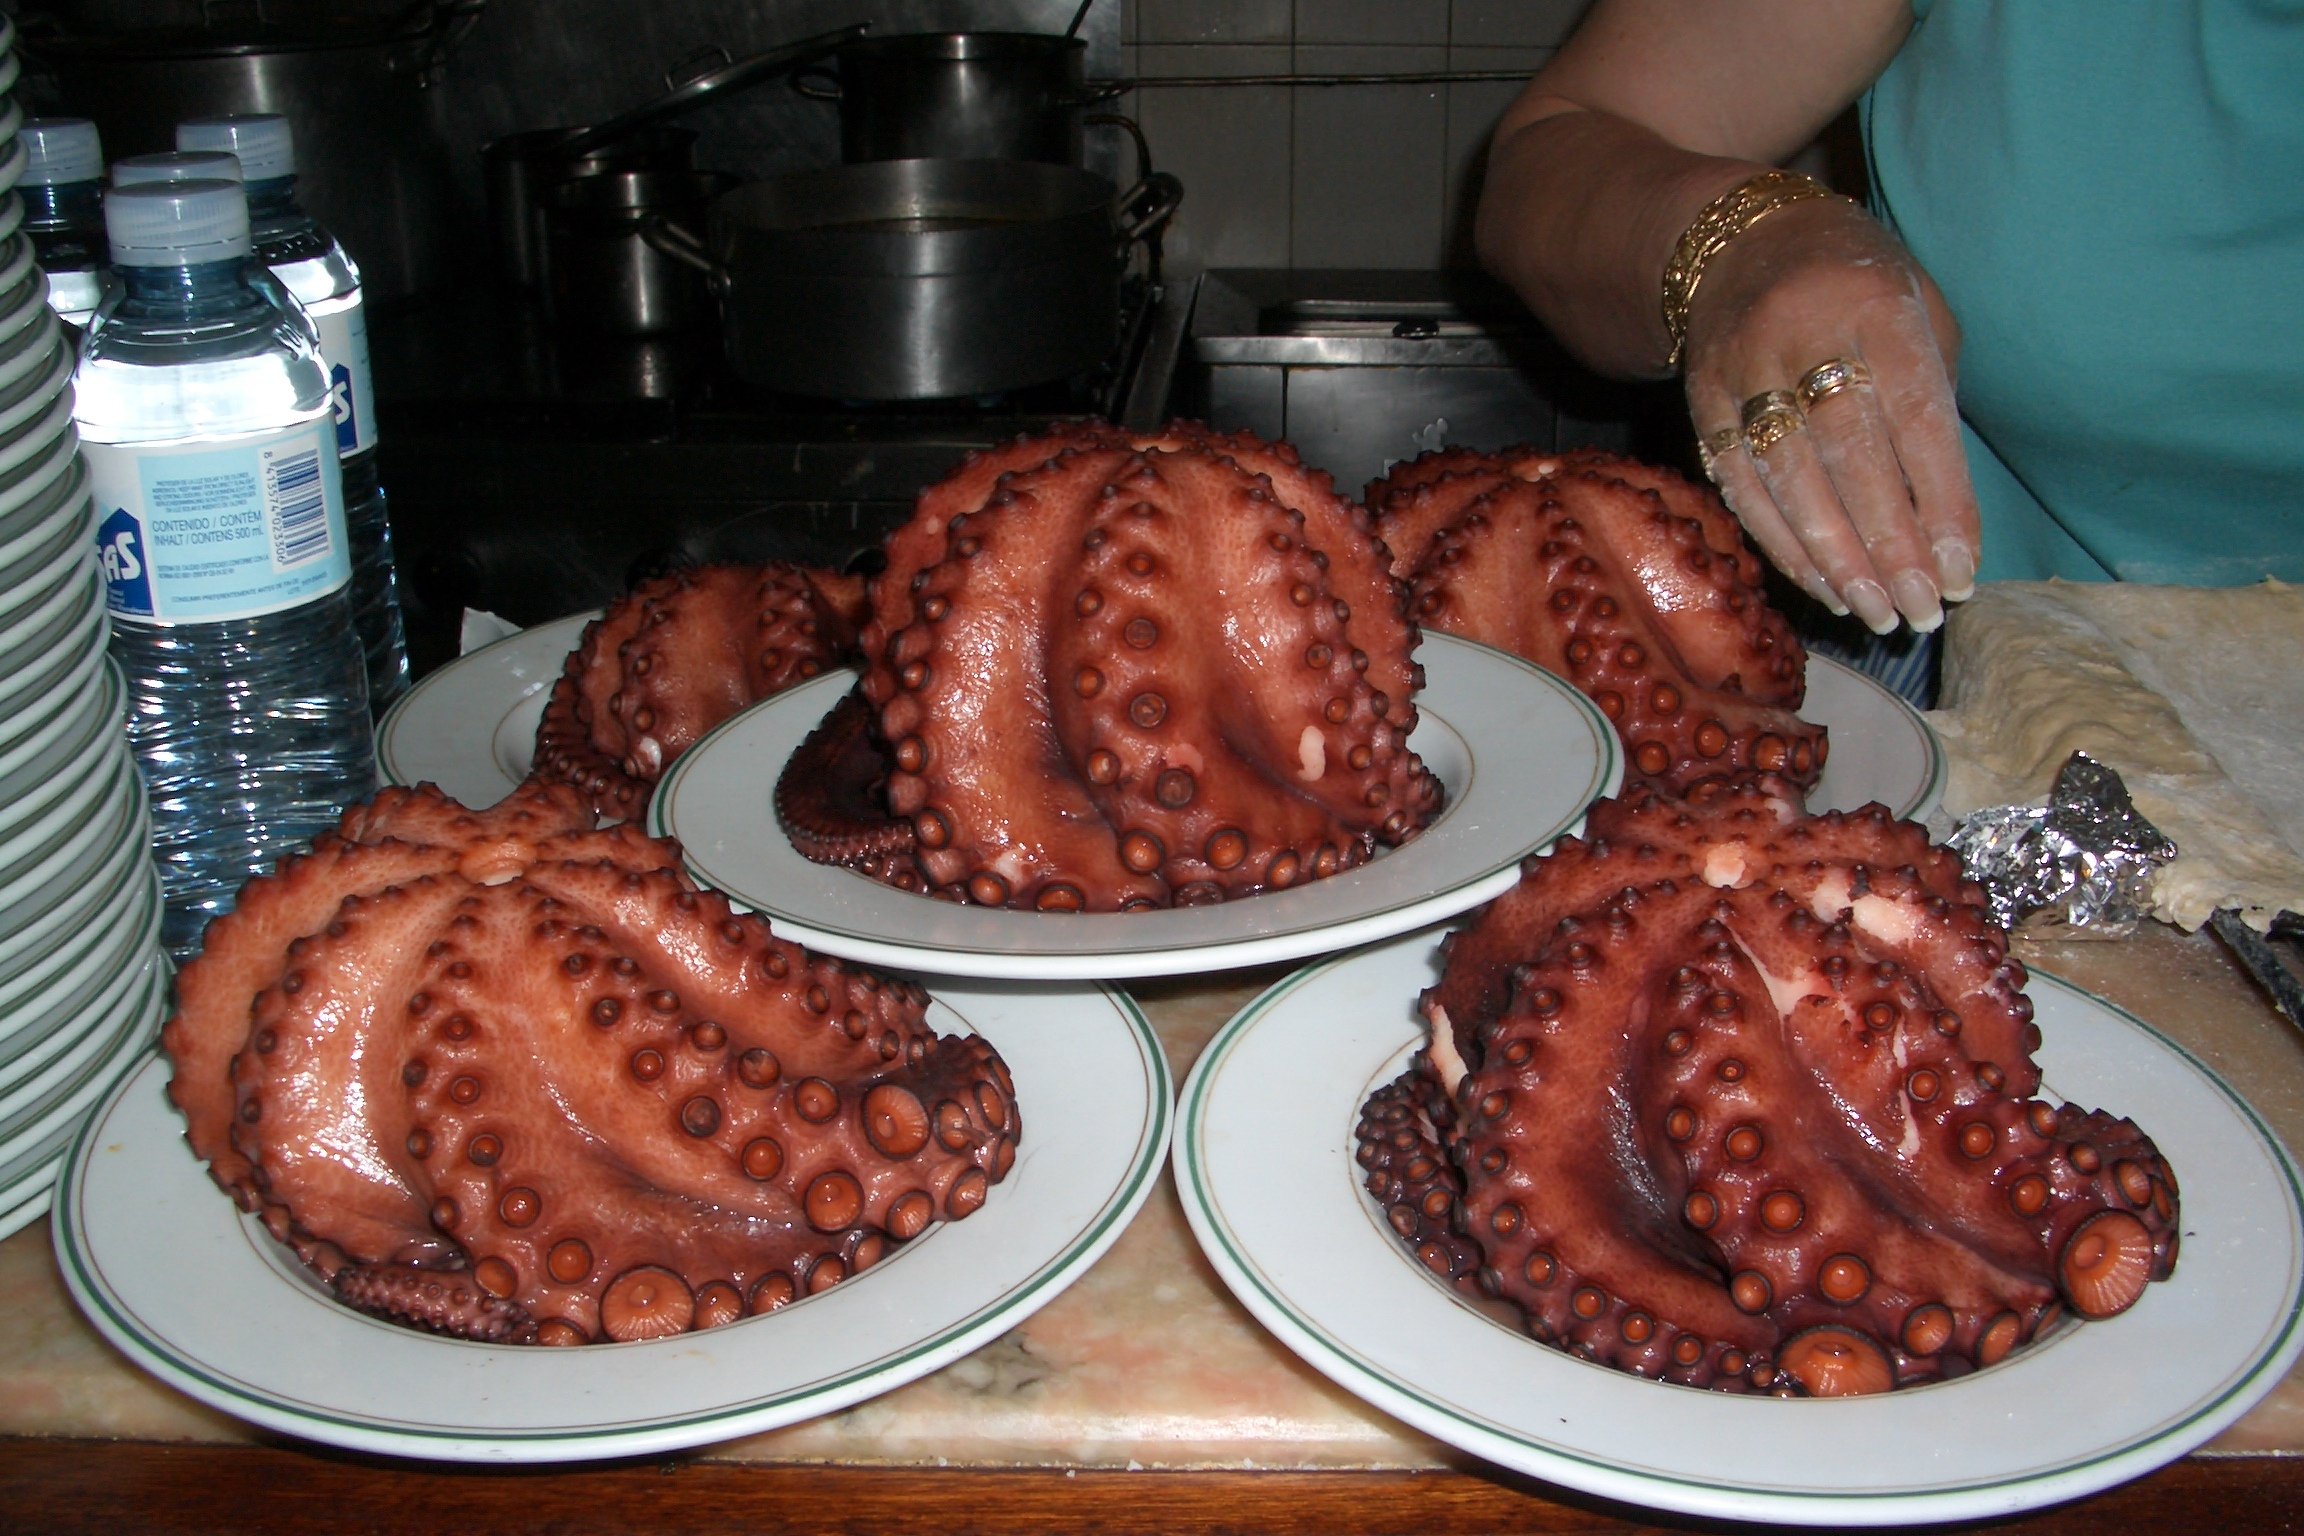 Octopuseseses